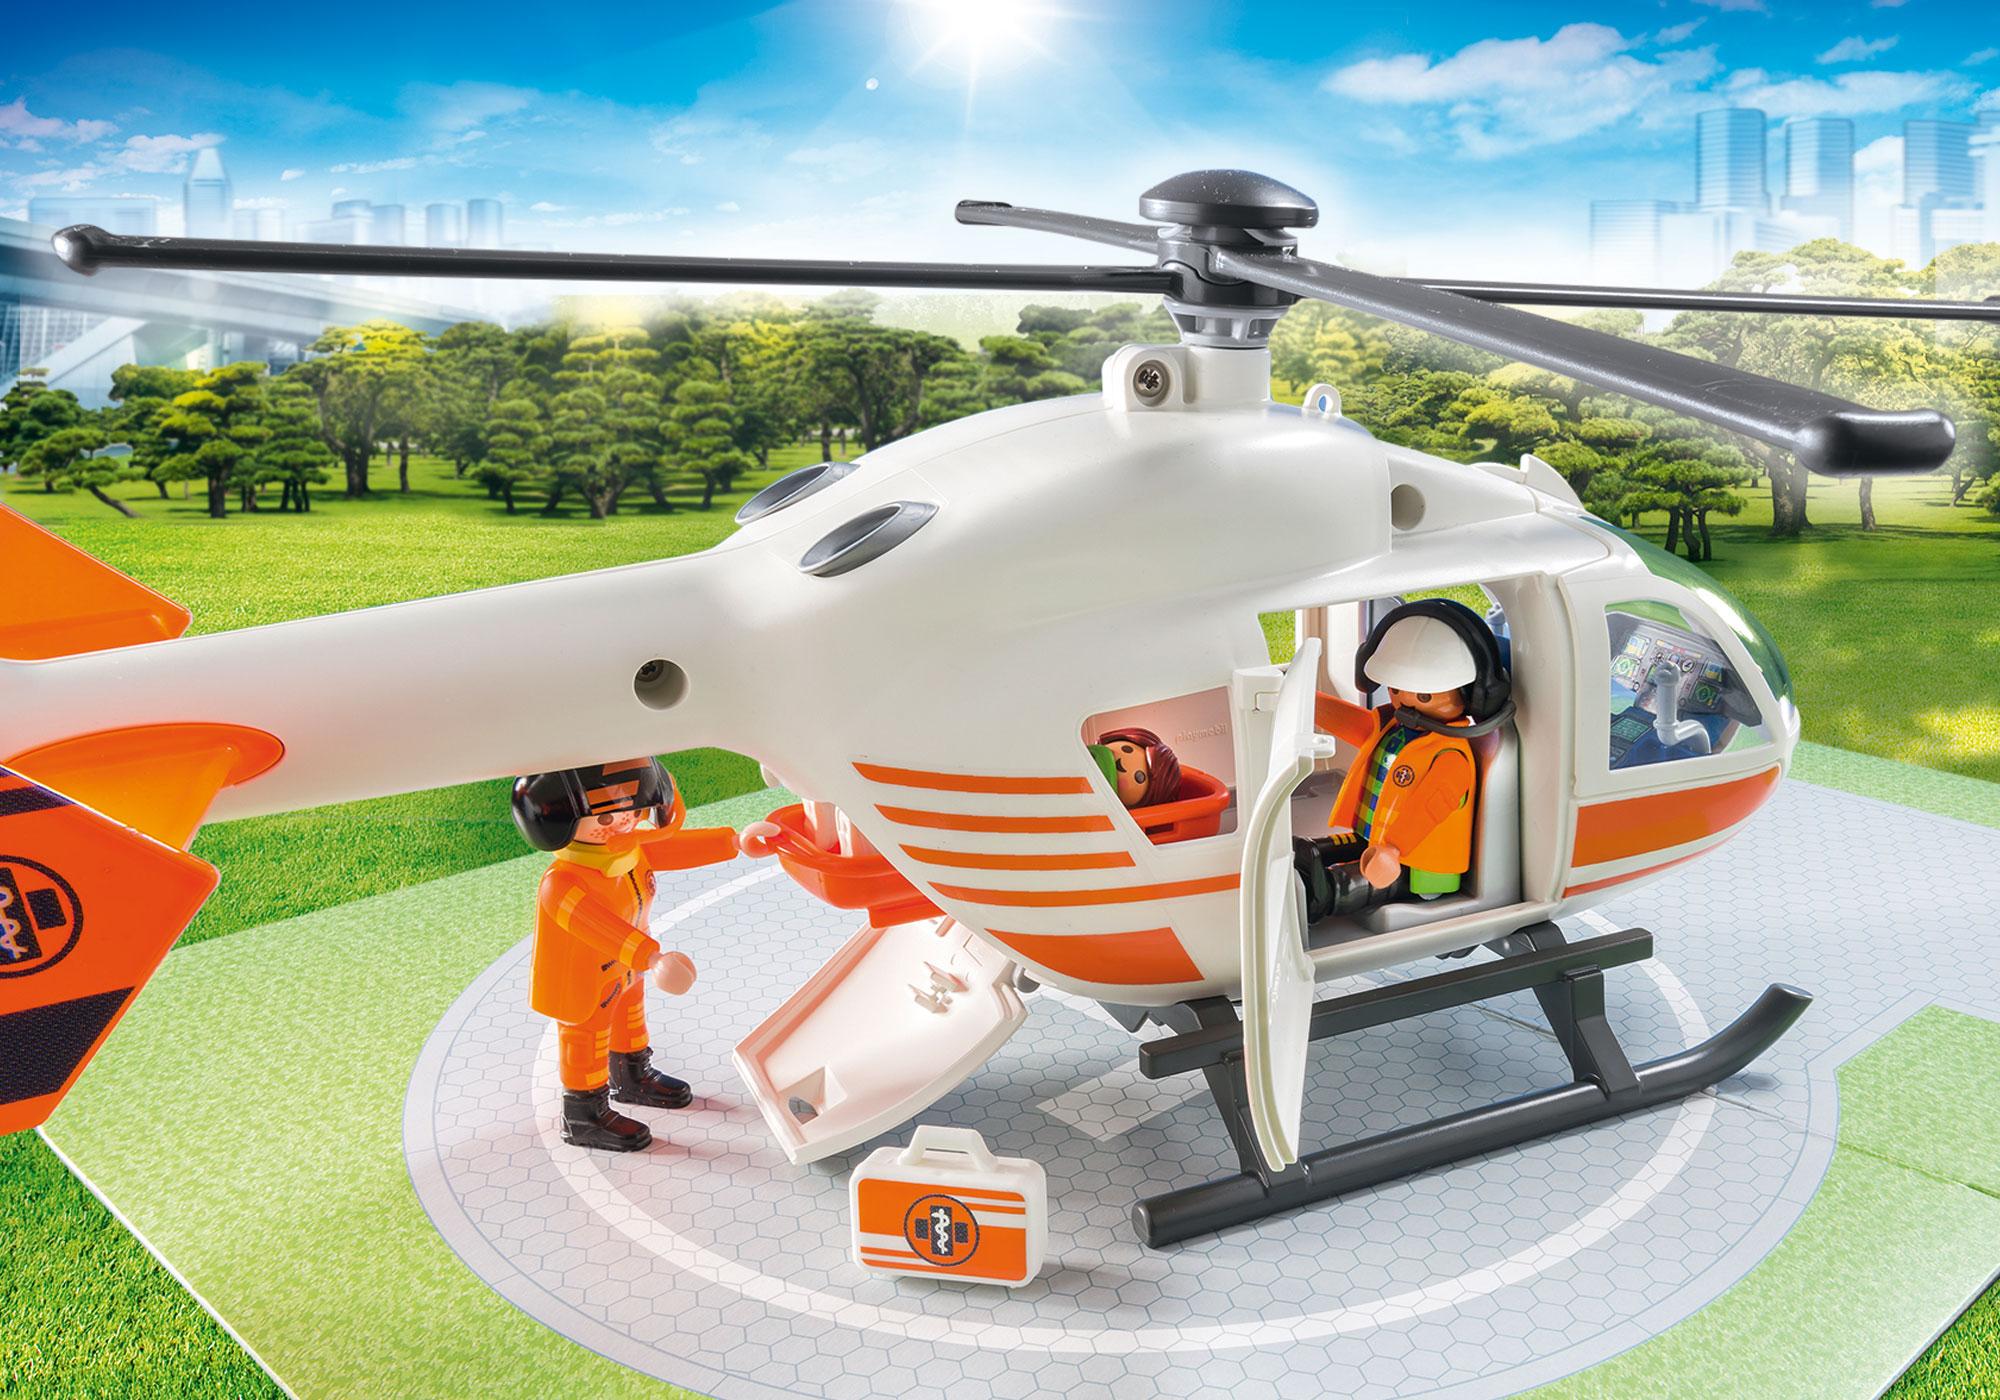 helicoptere ambulance playmobil